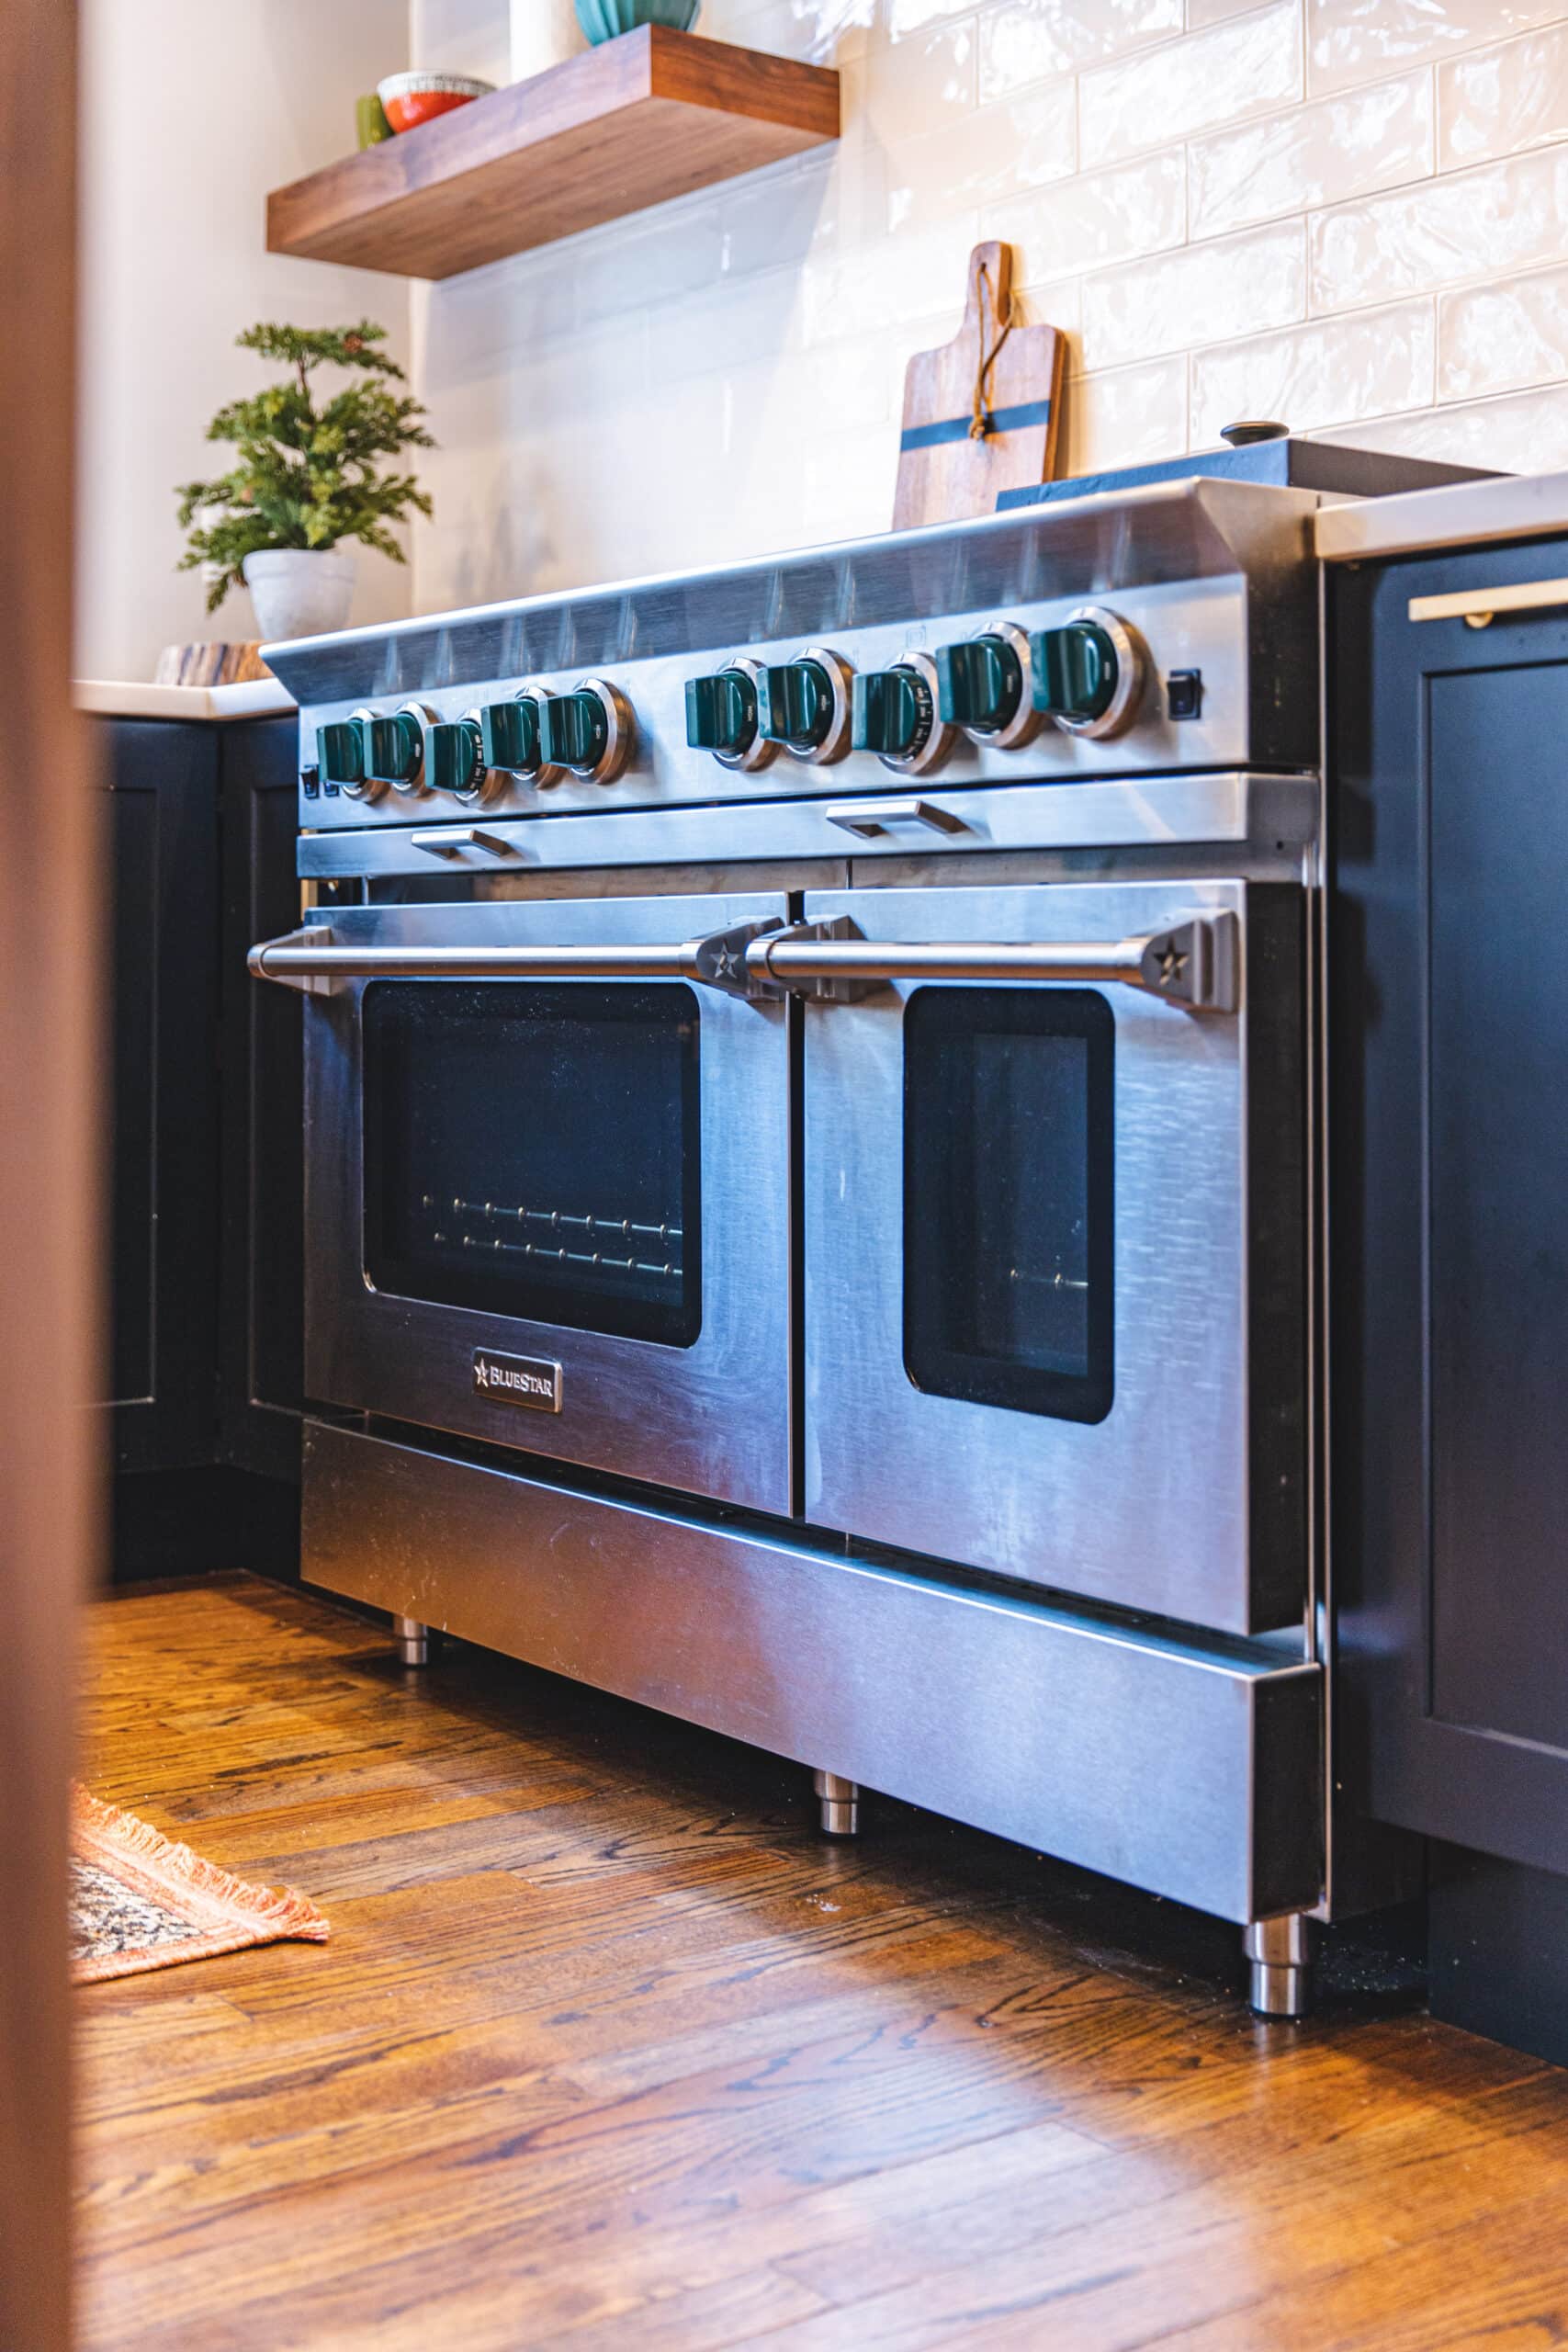 A stainless steel oven in a kitchen with wood floors.